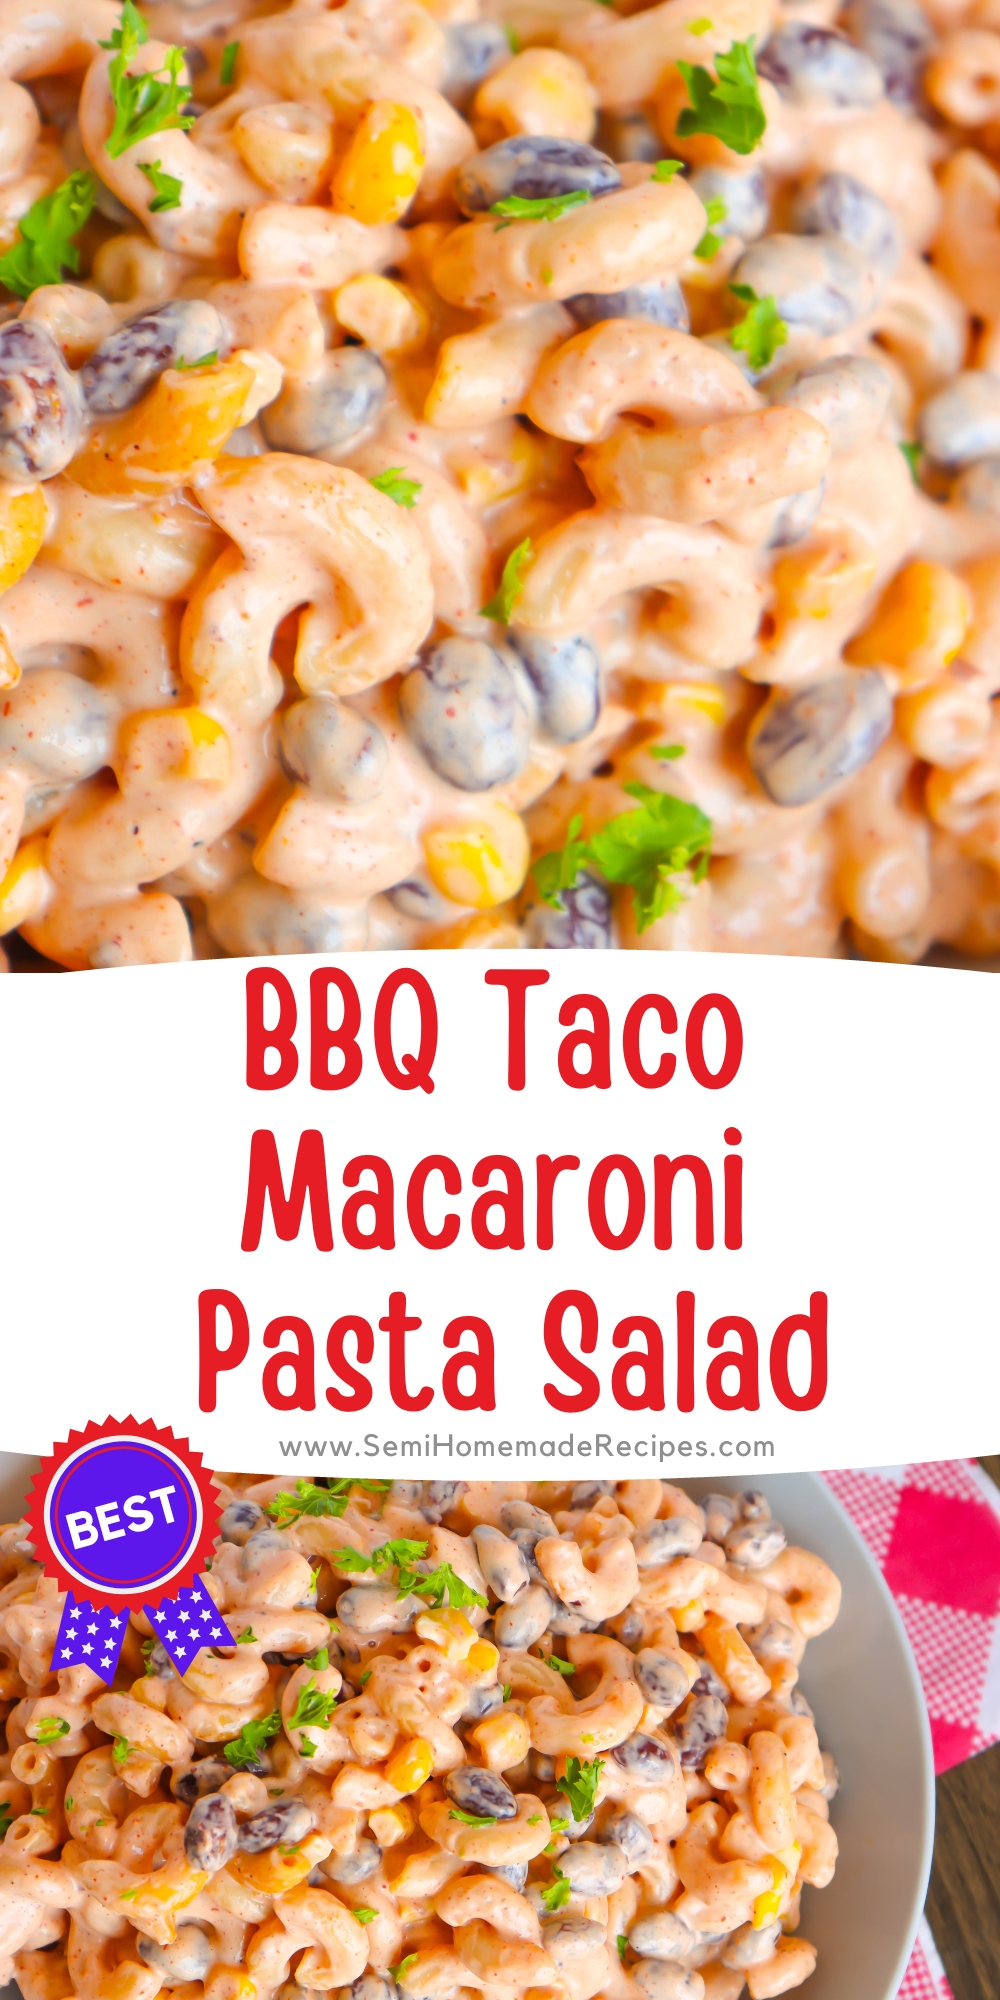 Incorporate this BBQ taco macaroni pasta salad into your next gathering and watch as your guests rave about the unique twist. With the perfect fusion of BBQ and tacos, it's an easy-to-make crowd pleaser that will leave everyone asking for the recipe. Don't be afraid to experiment with different ingredients and toppings to create your own personalized version. So, go ahead and give this surprising twist a try – your taste buds will thank you!